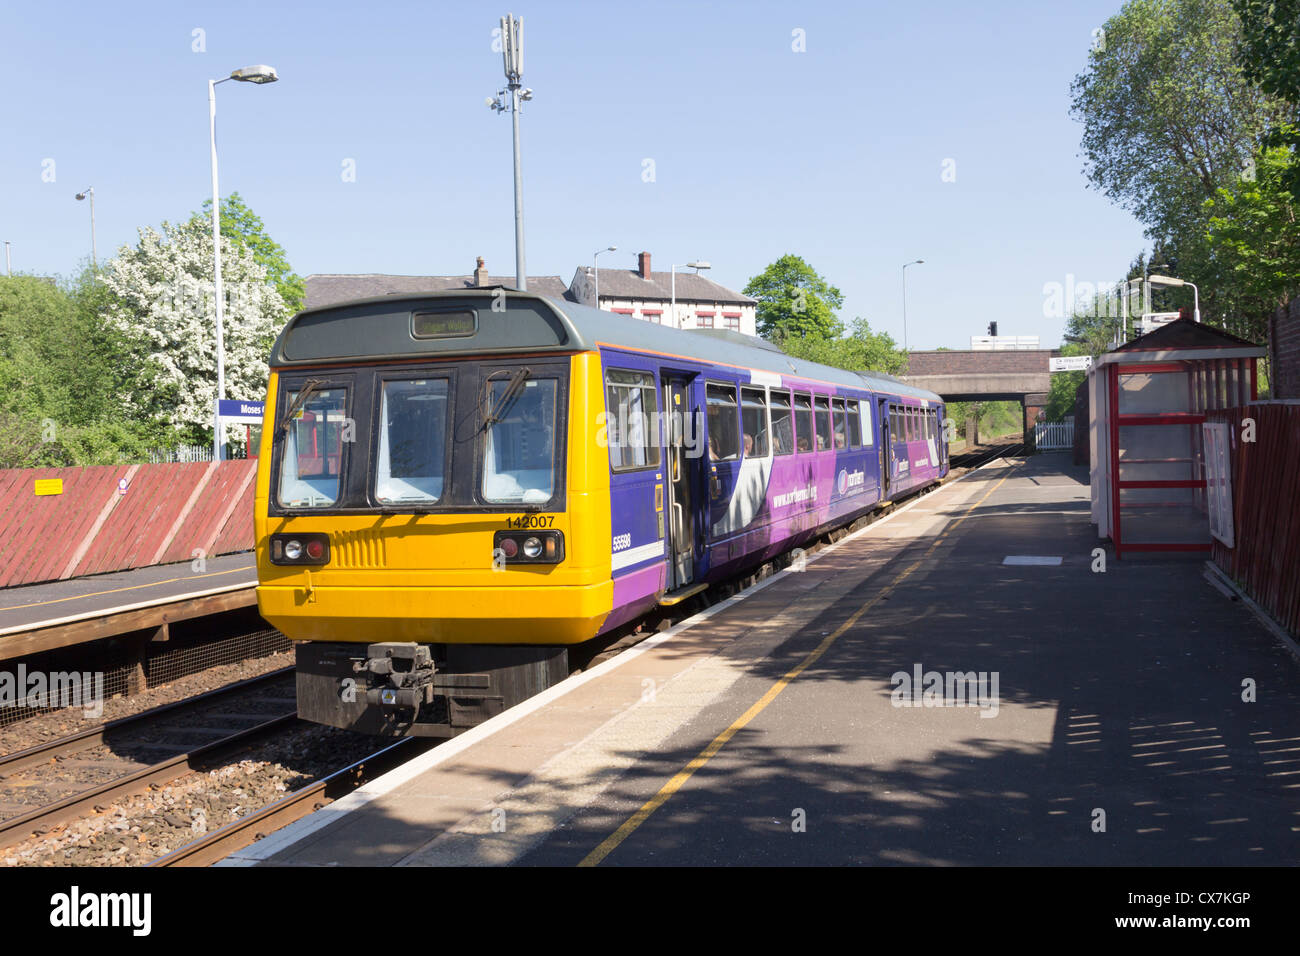 Class 142 'Pacer' train 142007 operated by Northern Rail on the Manchester to Wigan service at Moses Gate station, Farnworth. Stock Photo